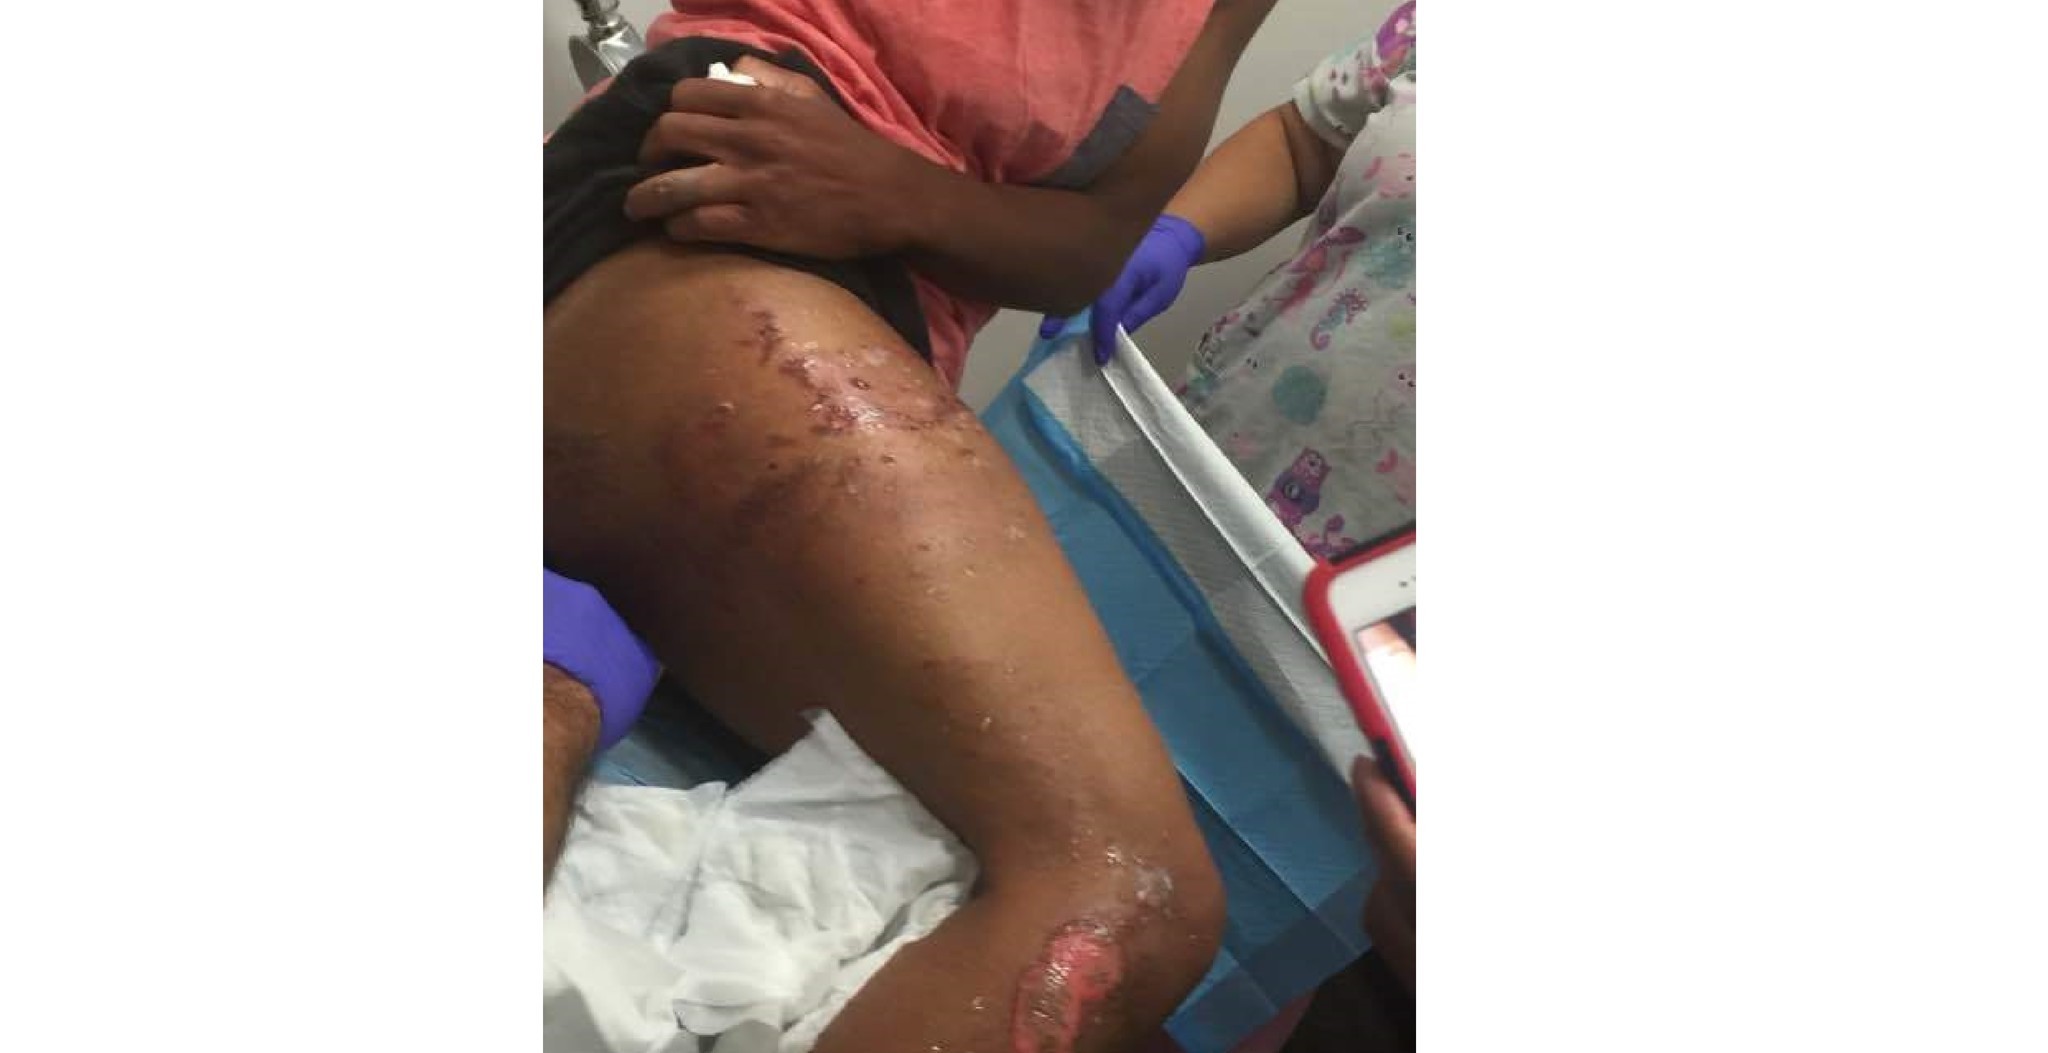 Tatyana Hargrove says she was attacked by a Bakersfield police dog after she mistaken for male suspect.